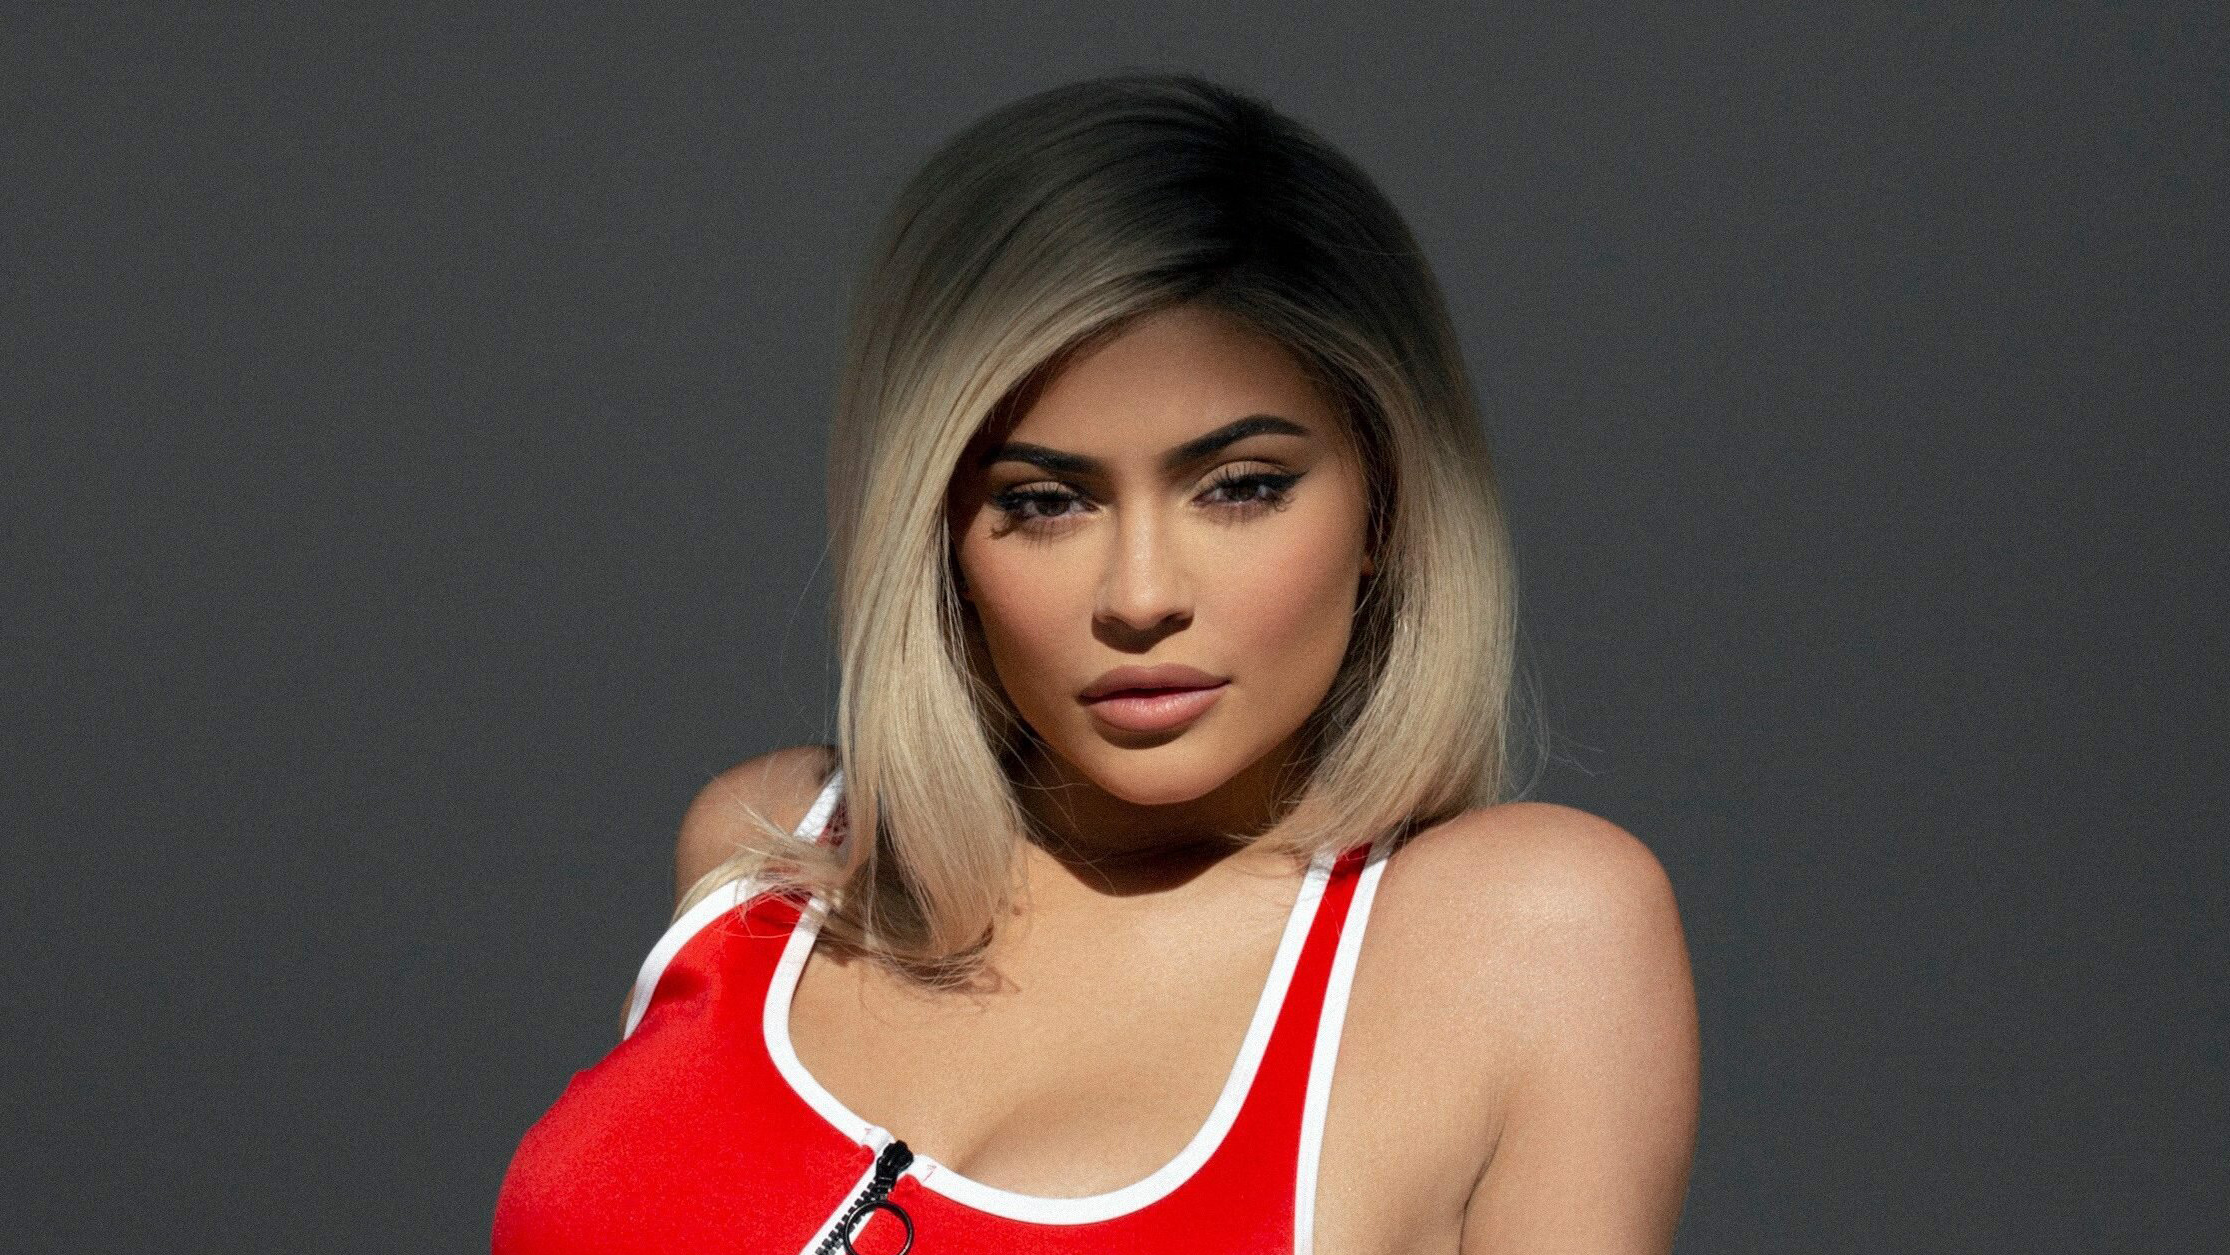 Kylie Jenner 2019 New Laptop Full HD 1080P HD 4k Wallpaper, Image, Background, Photo and Picture